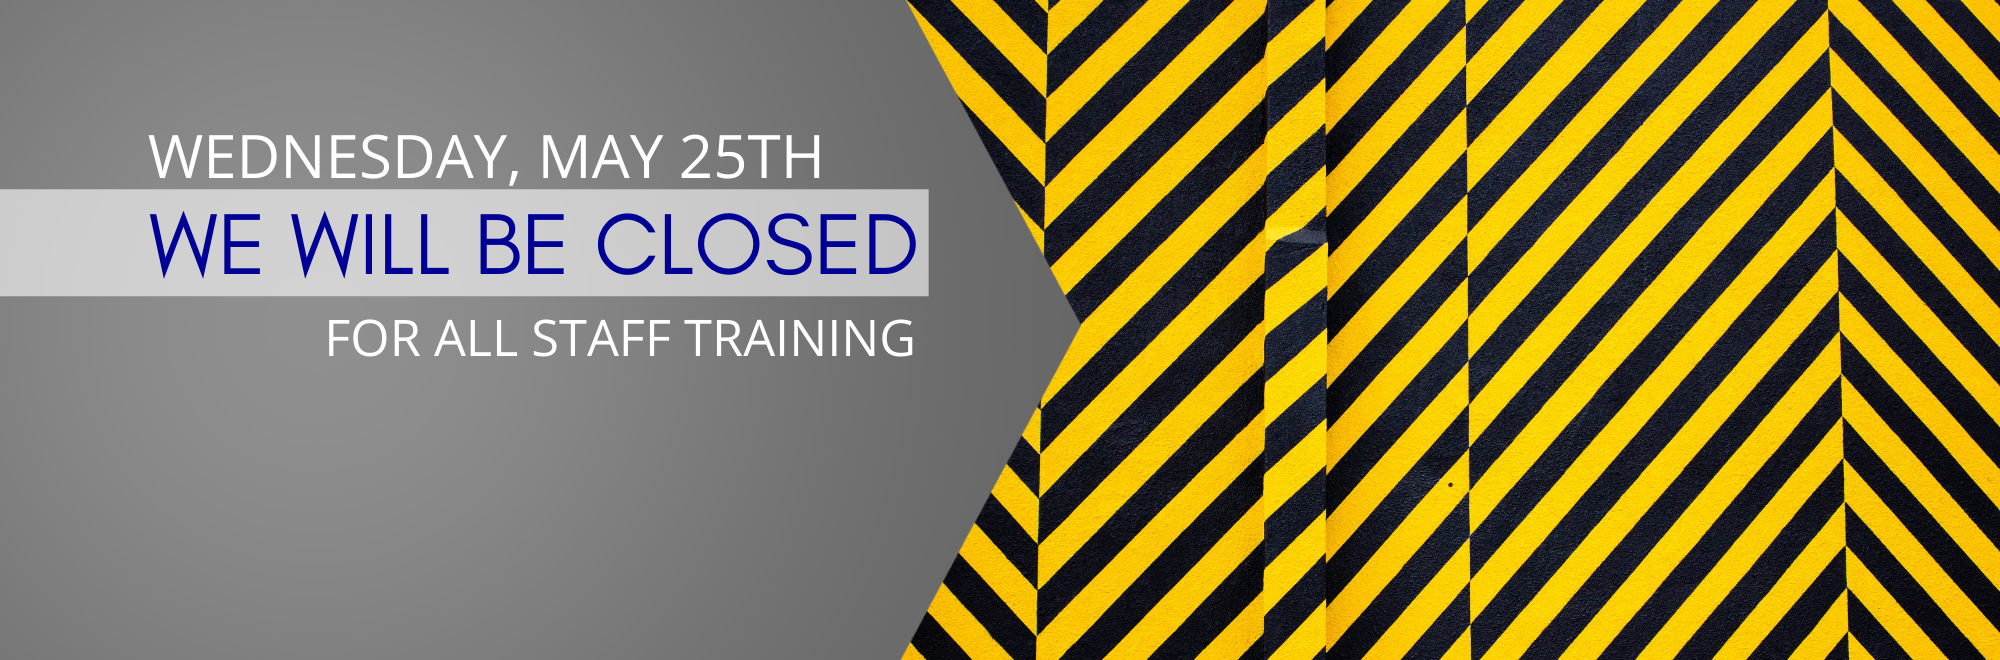 We will be closed Wednesday May 25th for all staff training